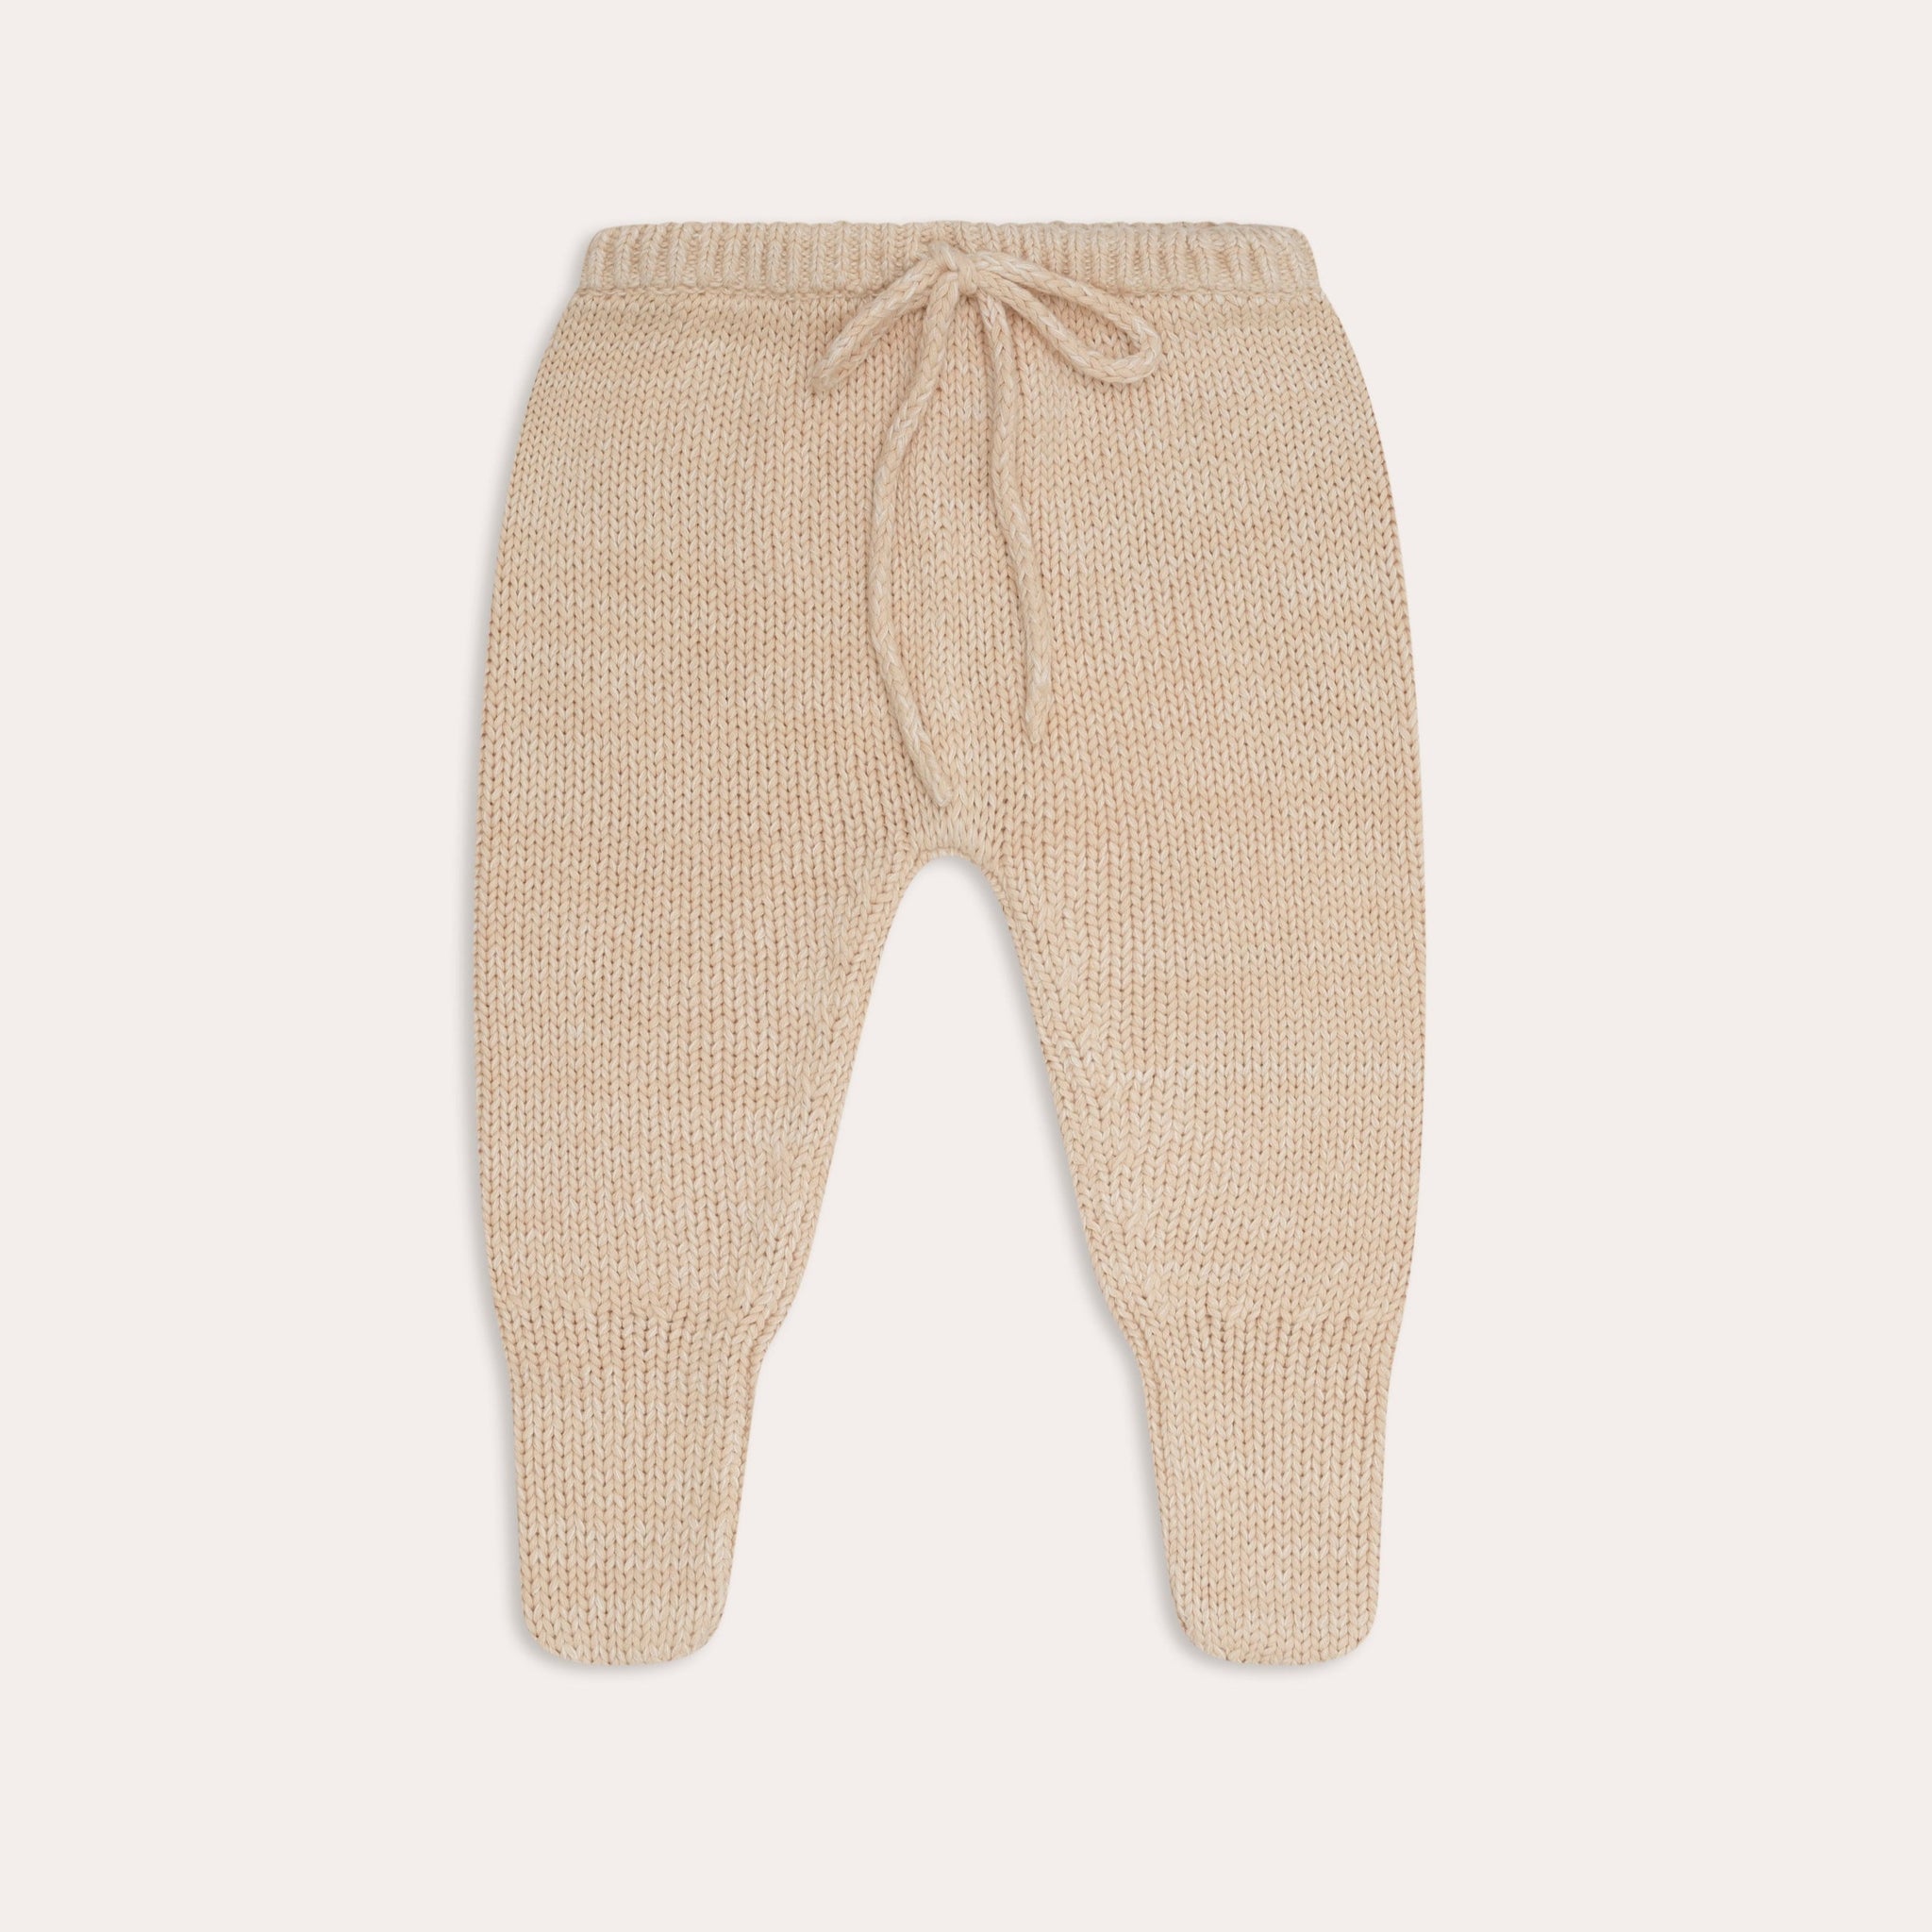 A baby's illoura knit poet pants in sand from Illoura the Label.